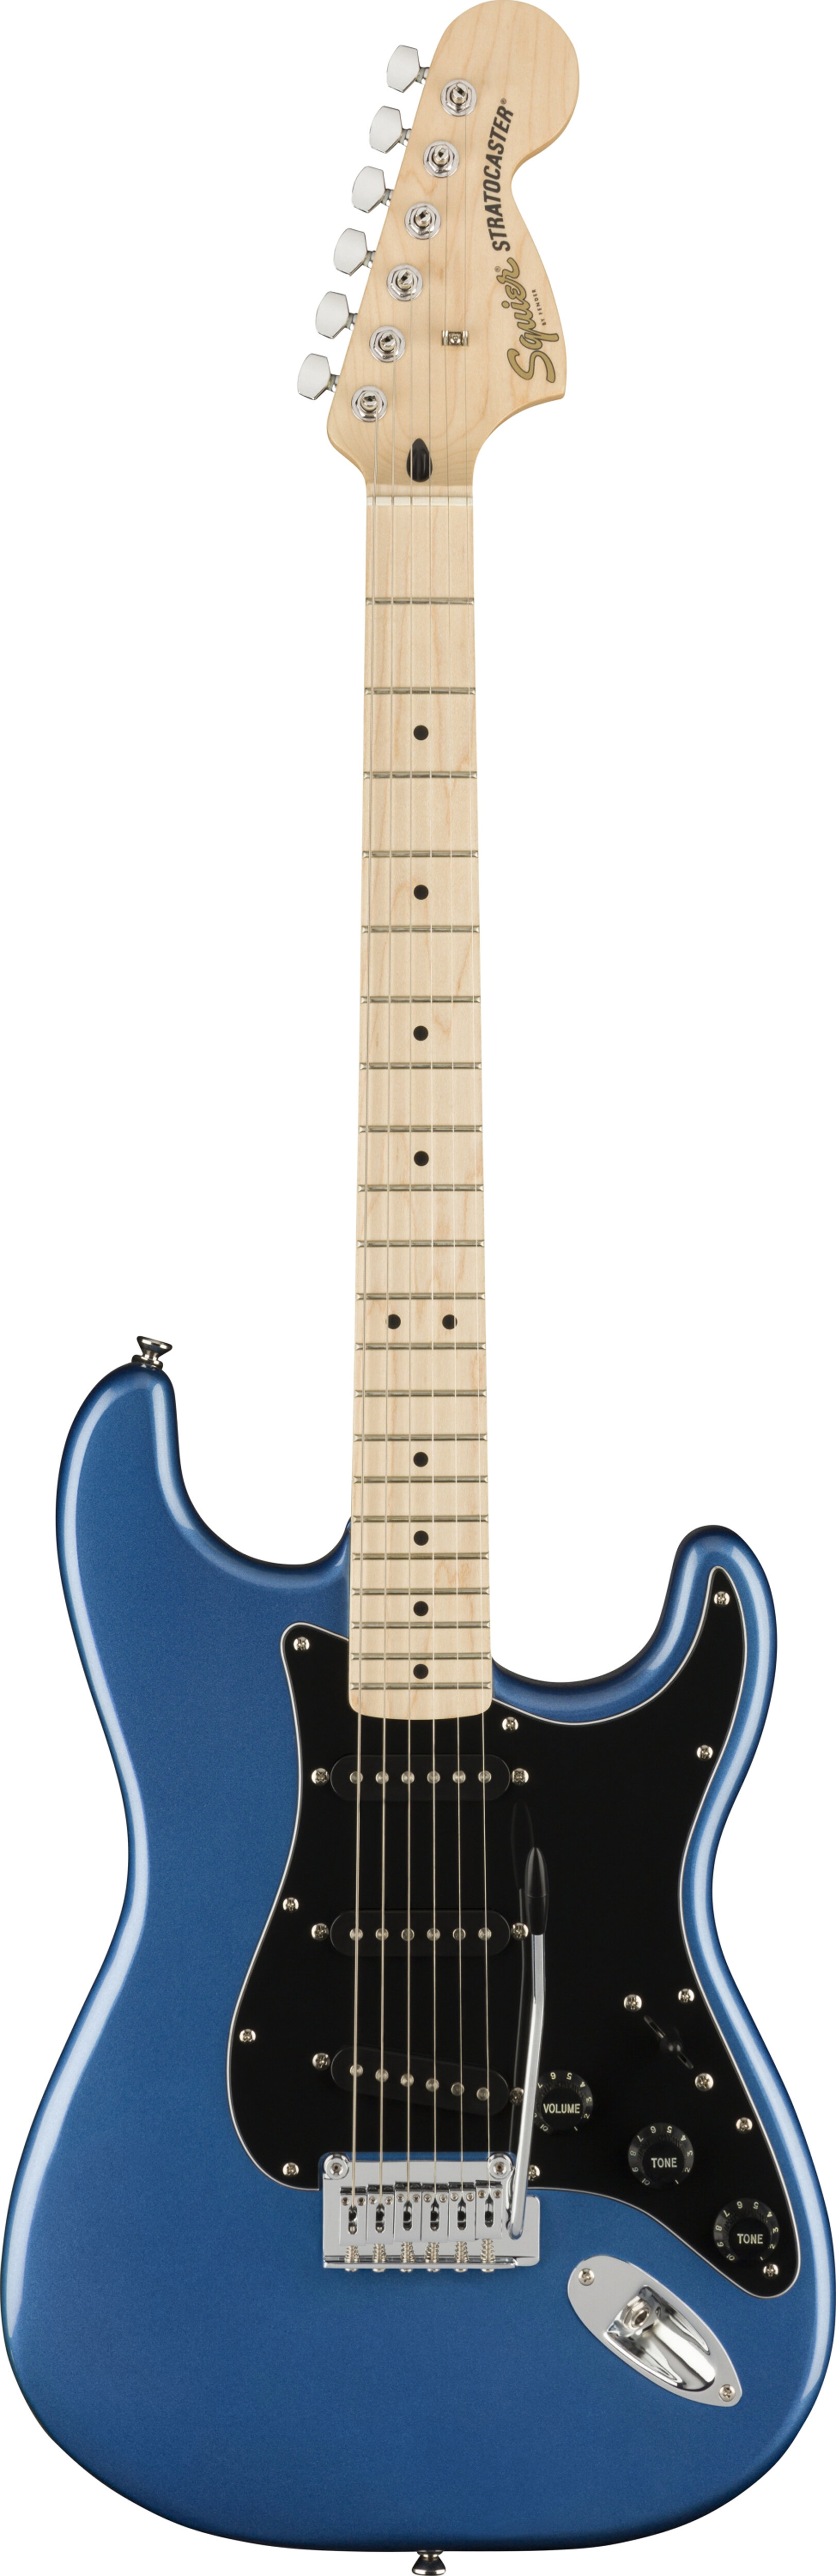 Squier Affinity Stratocaster MN Lake Placid Blue -  0378003502